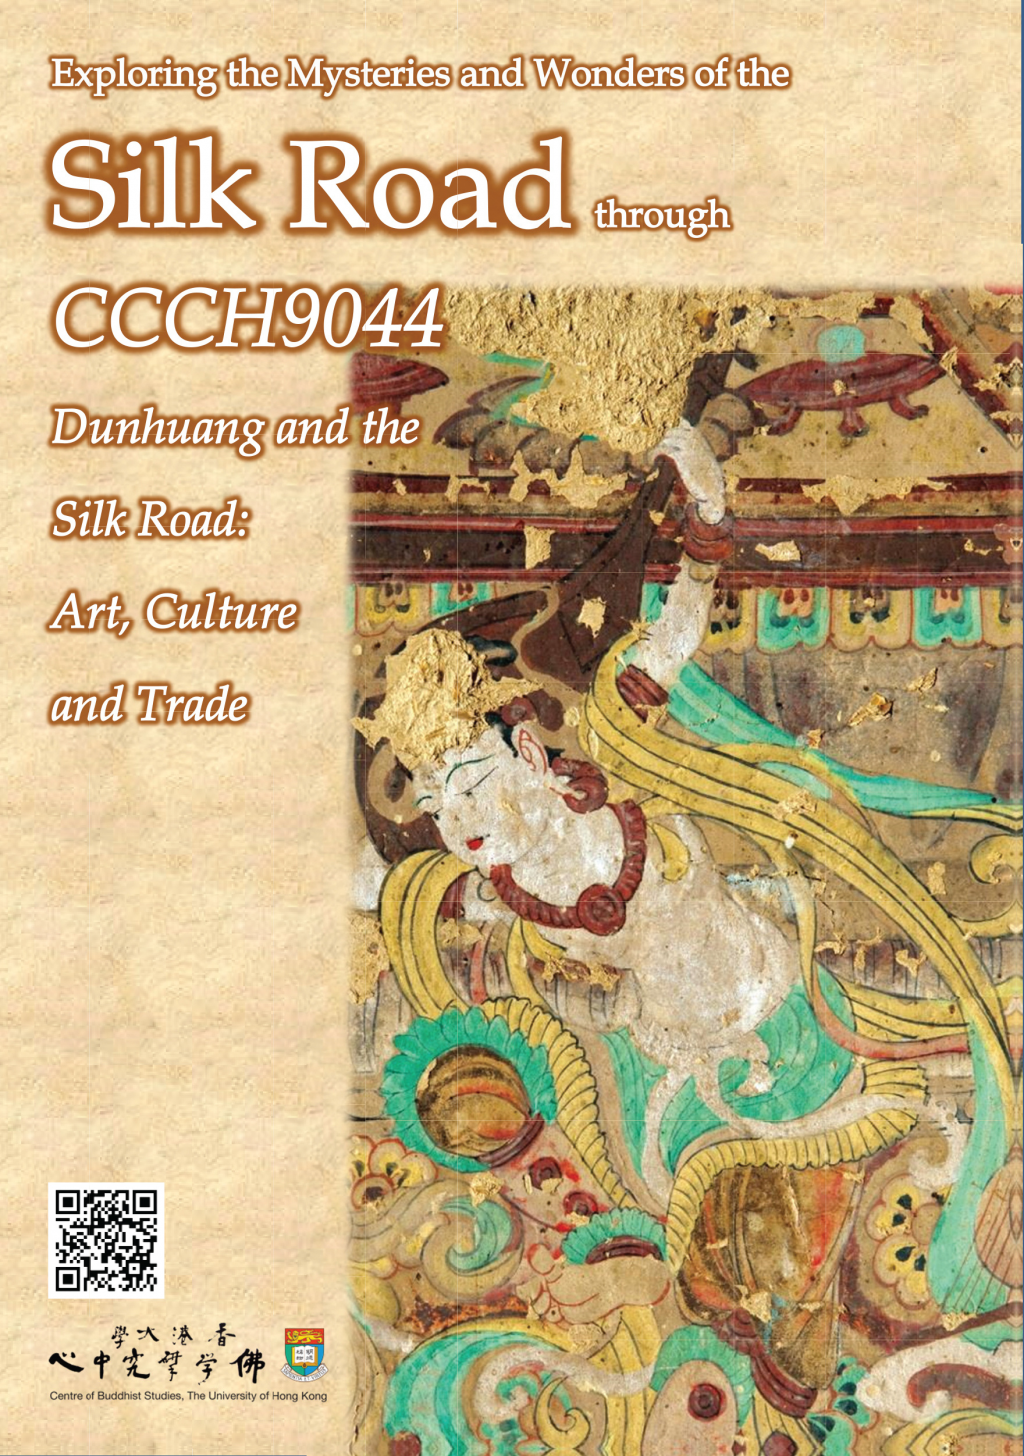 Exploring the Mysteries and Wonders of the Silk Road through CCCH9044 Dunhuang and the Silk Road: Art, Culture and Trade